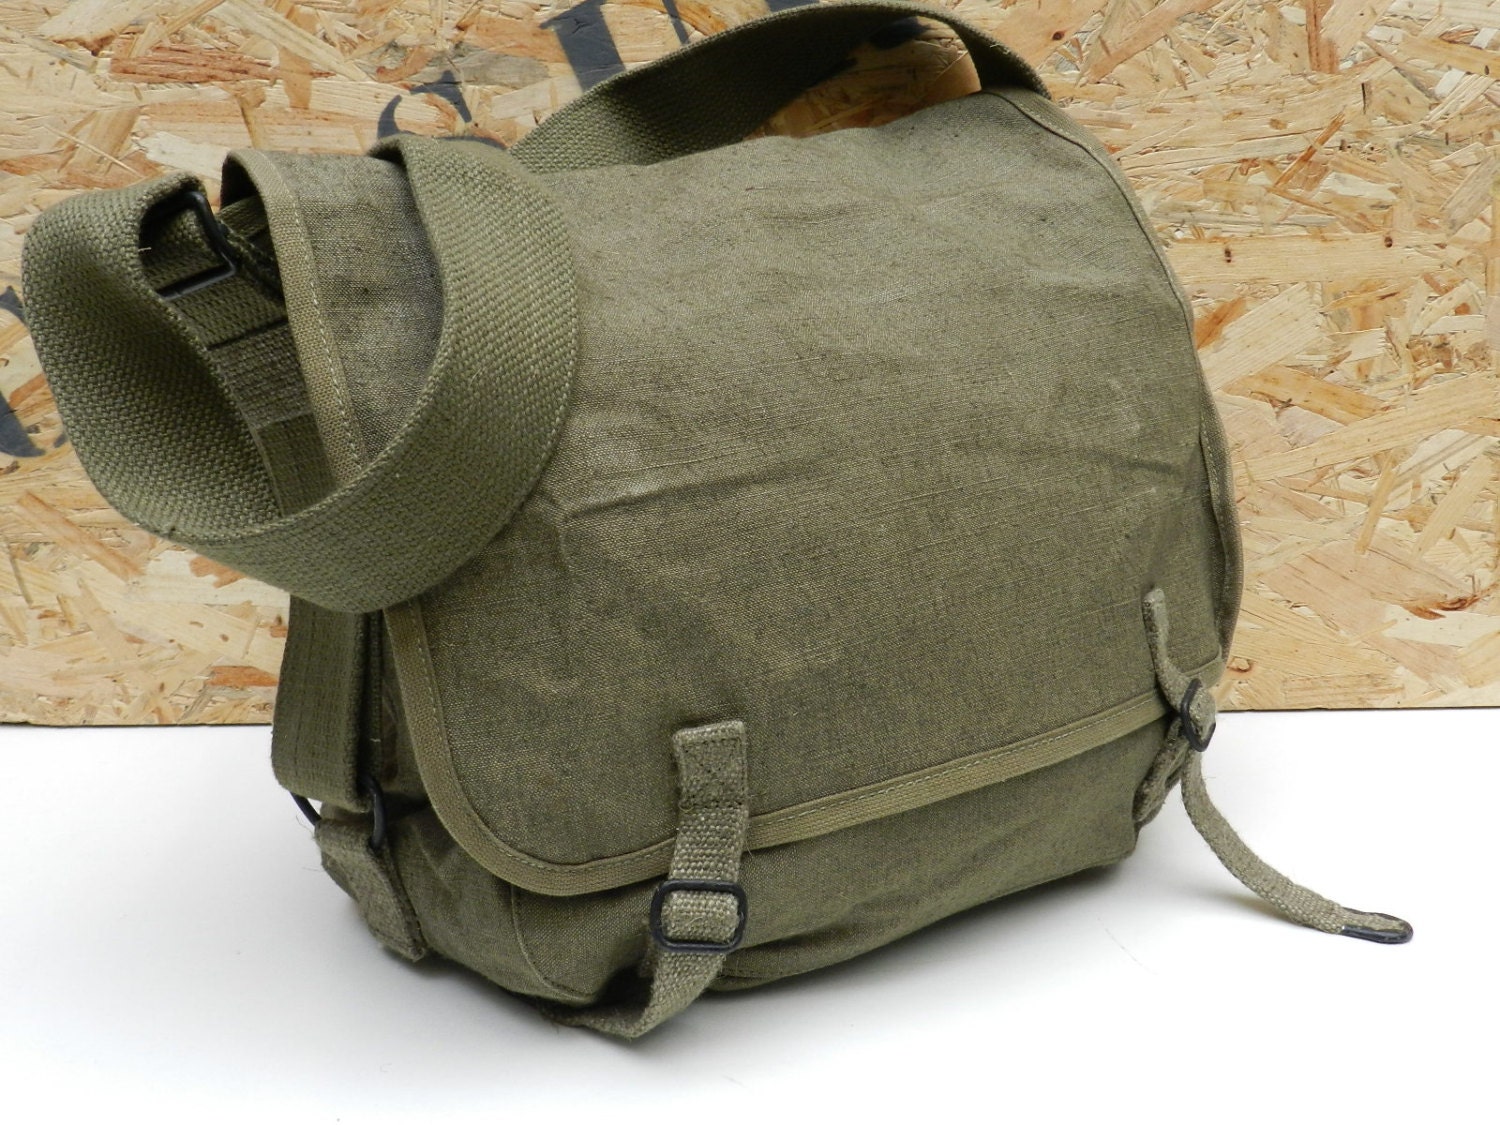 Unissued 1950s French army satchel new messenger bag ruck sack